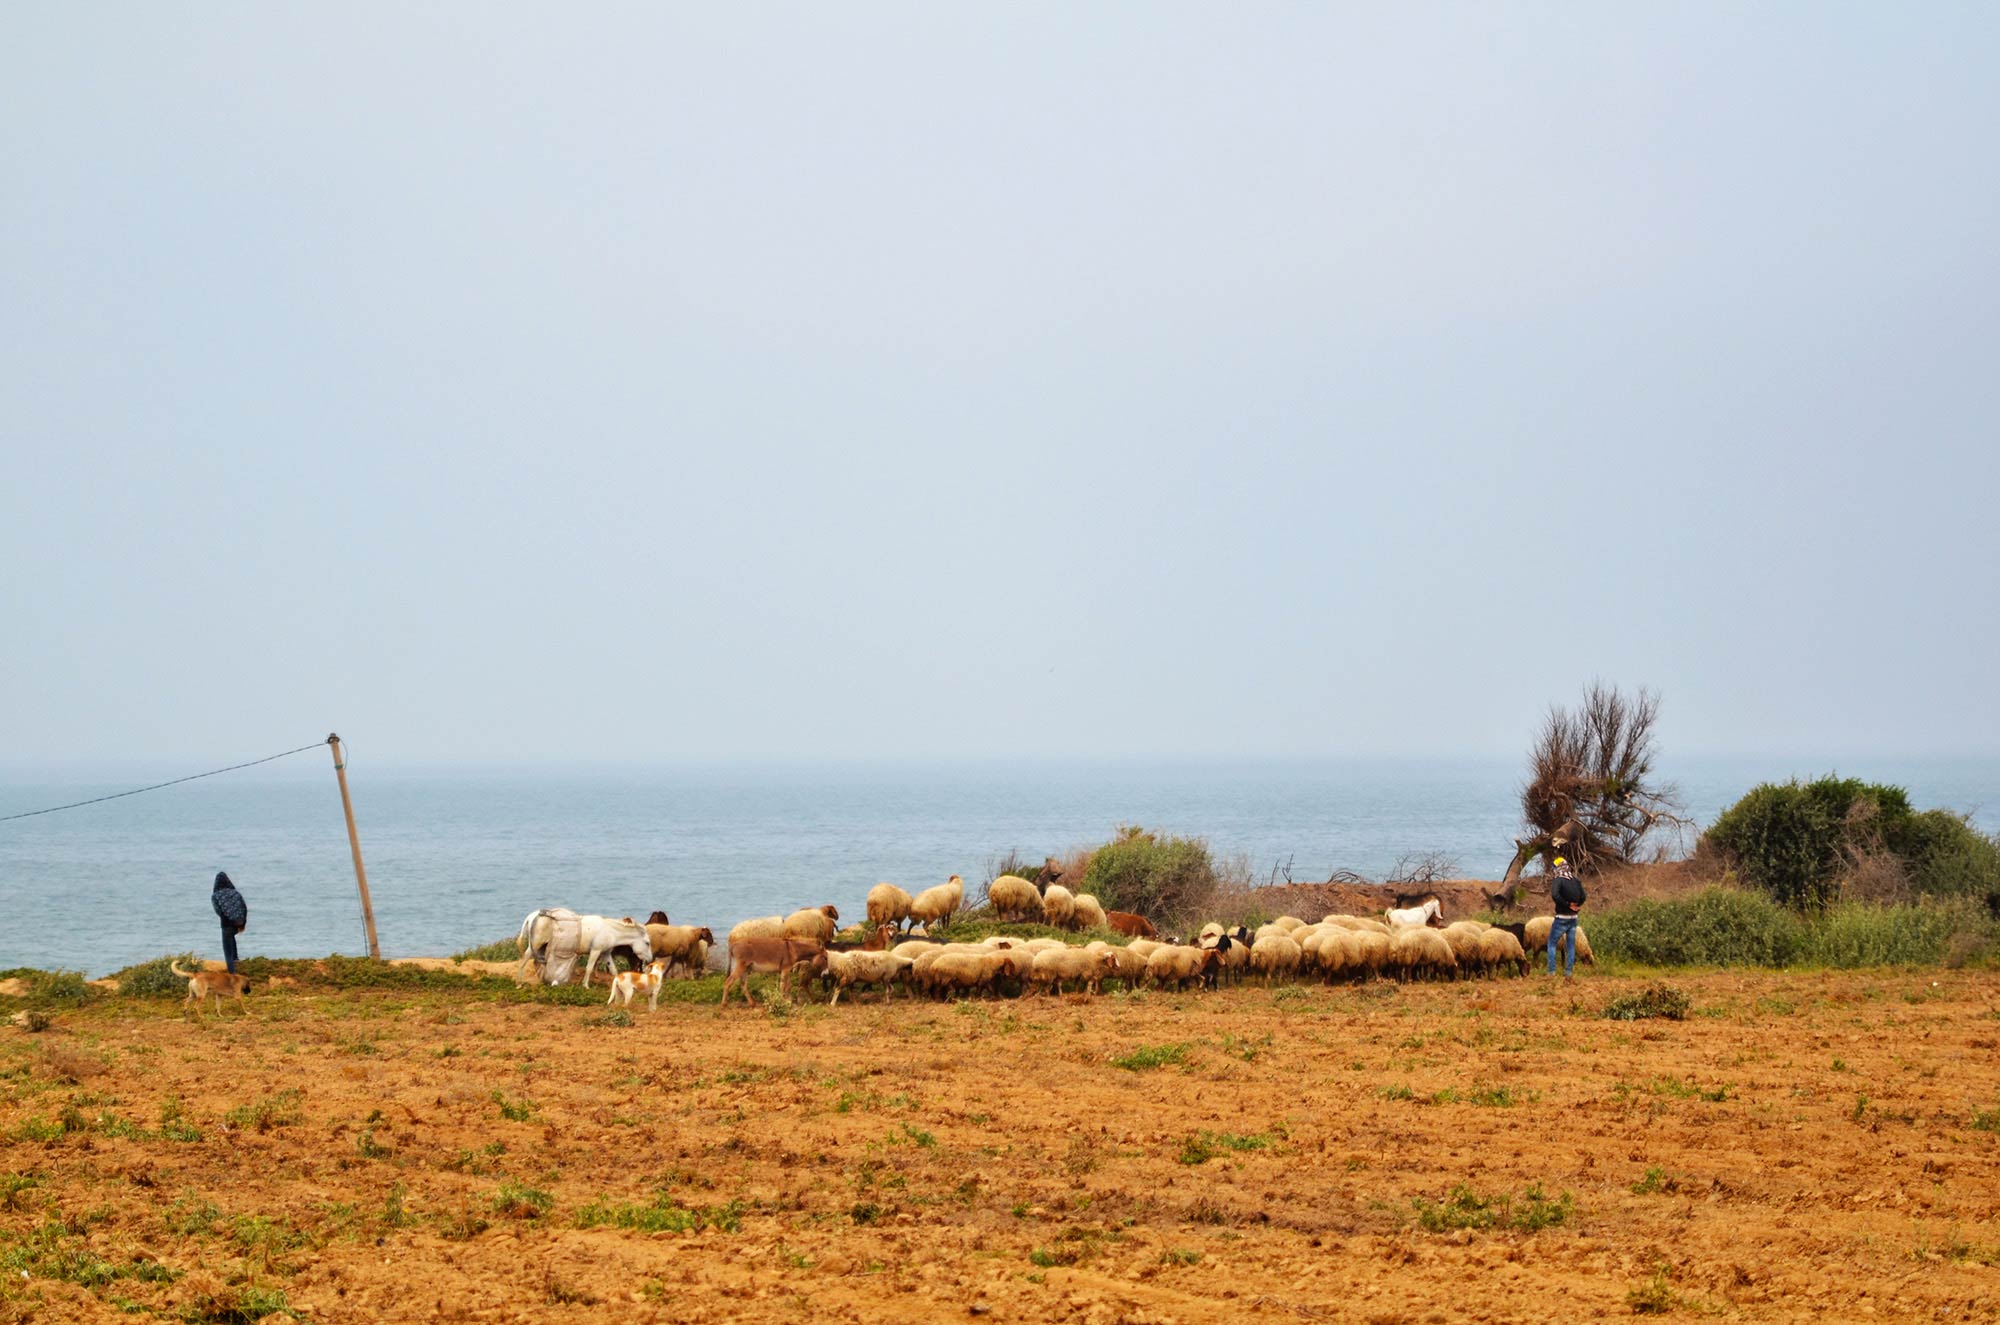 Amena likes to watch the local shepherds while taking a walk after working.